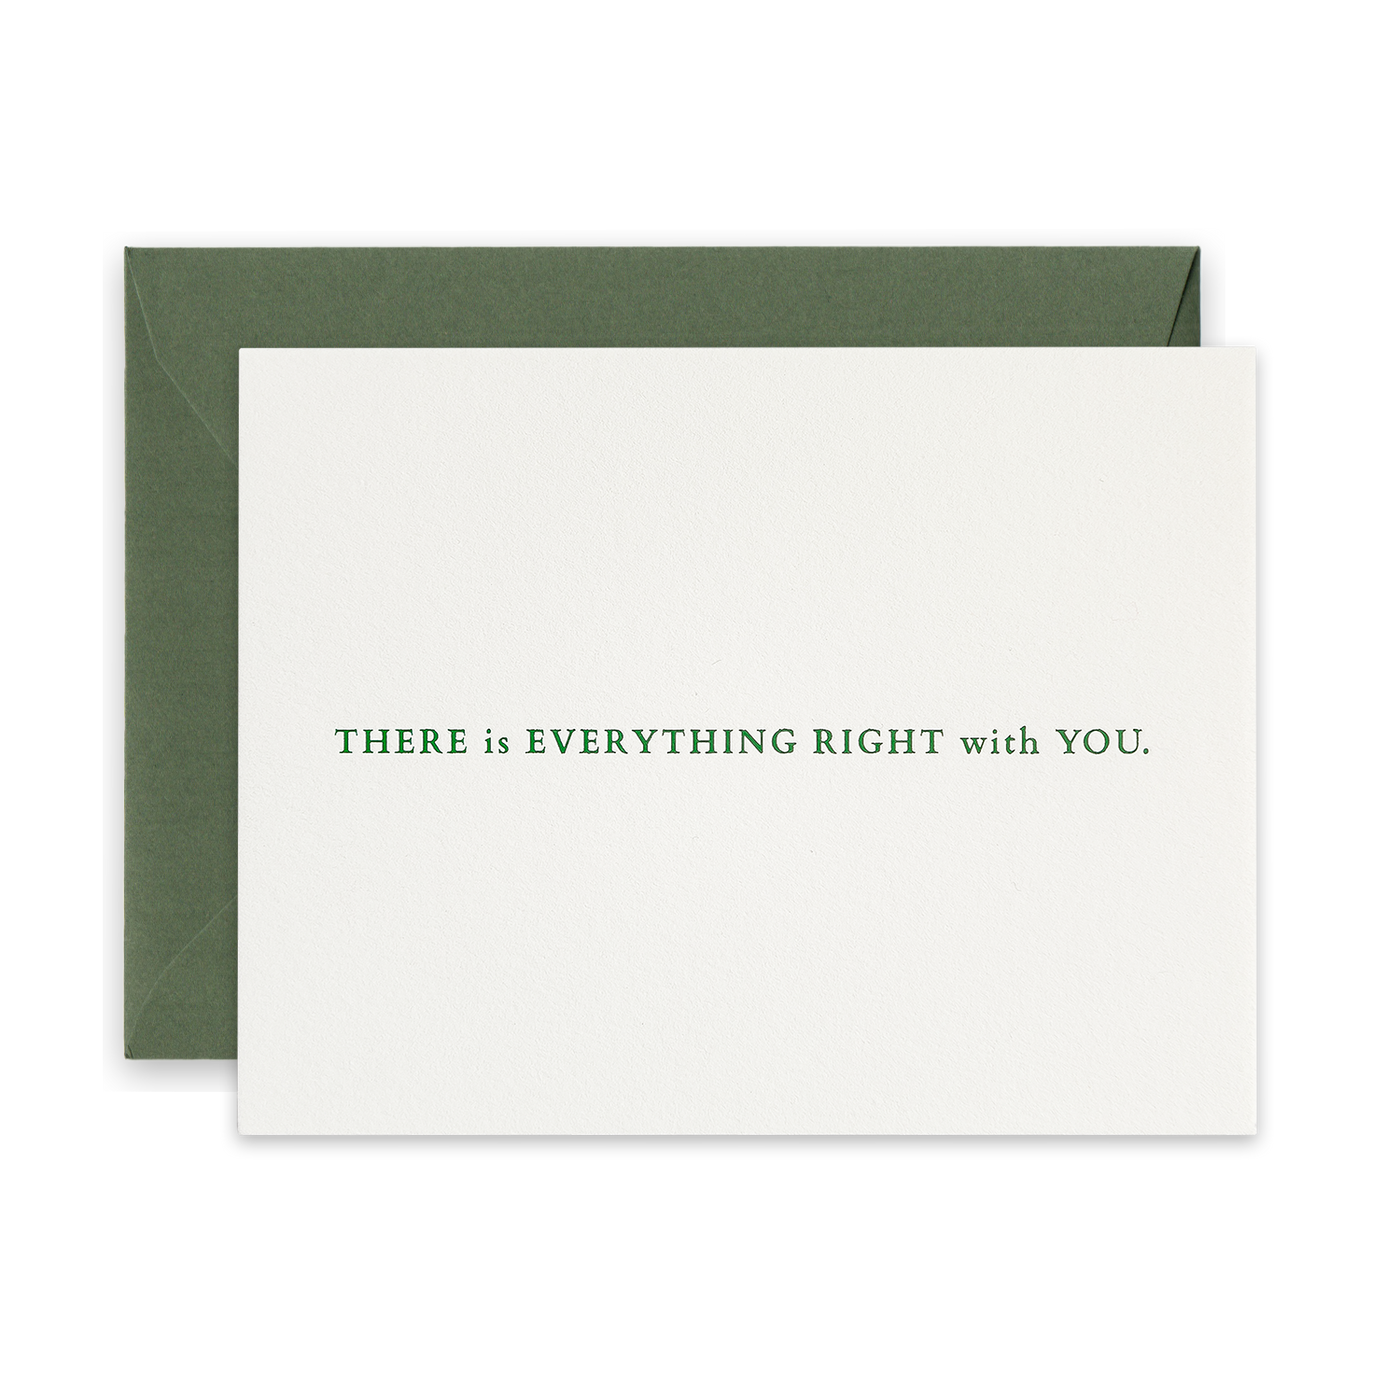 Green foil letterpress greeting card by beknown. There is everything right with you.